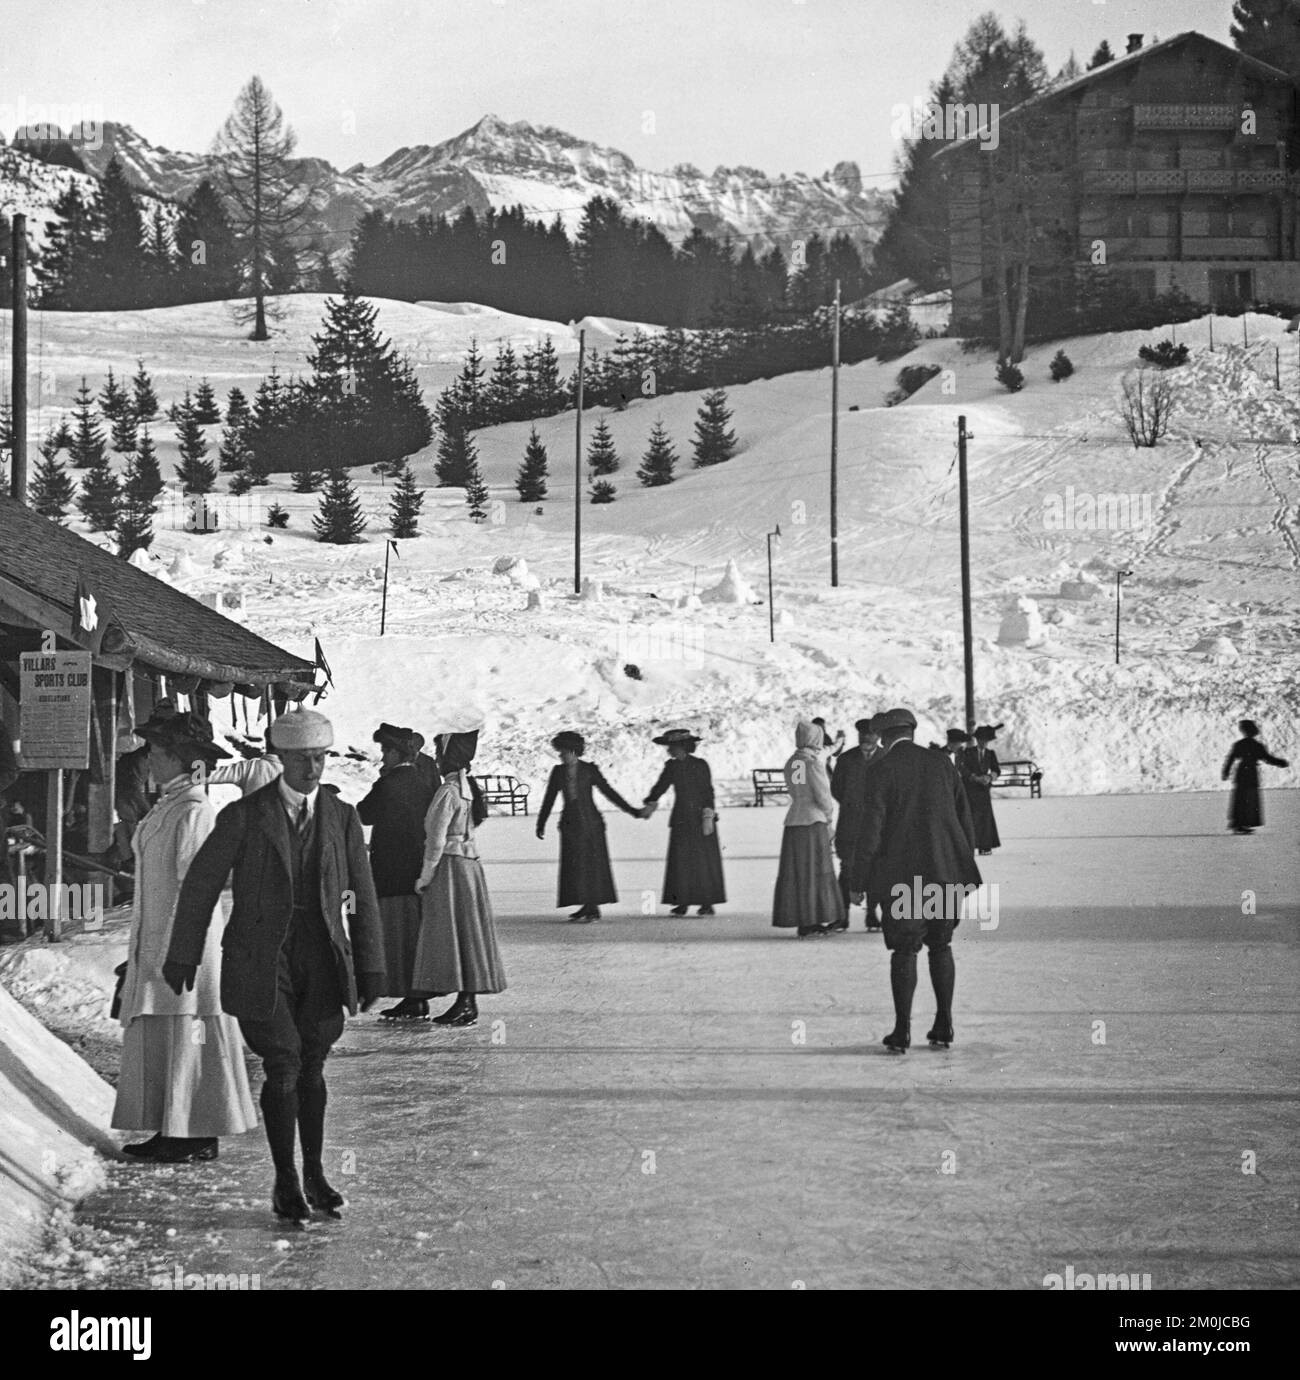 An early 20th Century vintage black and white photograph taken in Sass-Fee in Switzerland, showing a number of people skating on an outdoor skating rink. A sign for The Villars Sports Club on the left. Stock Photo